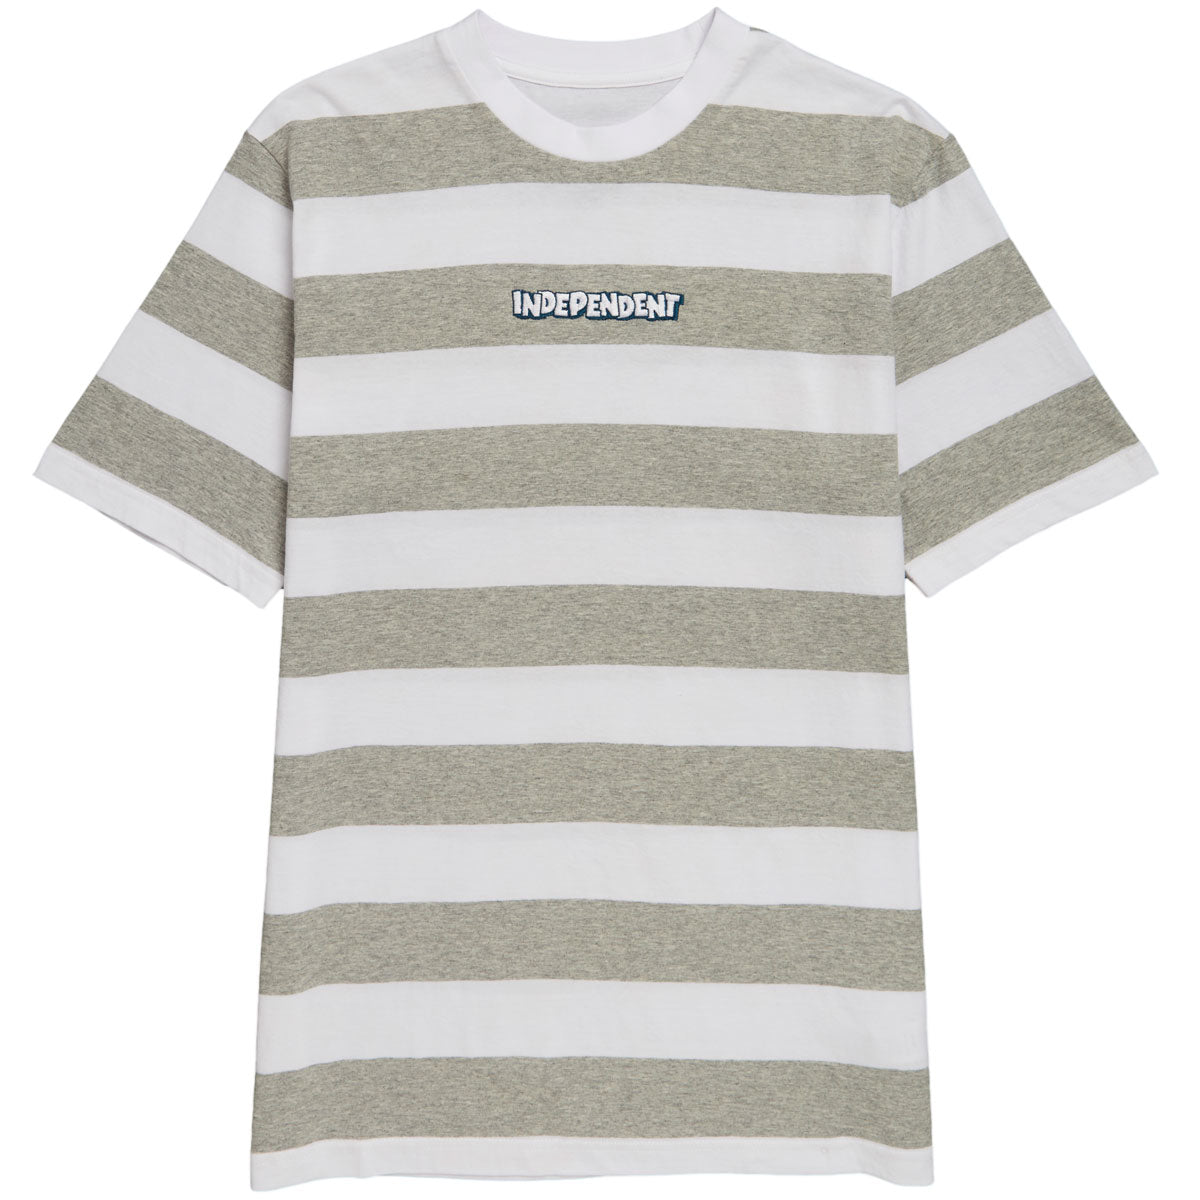 Independent Bounce Stripe T-Shirt - White/Grey Heather